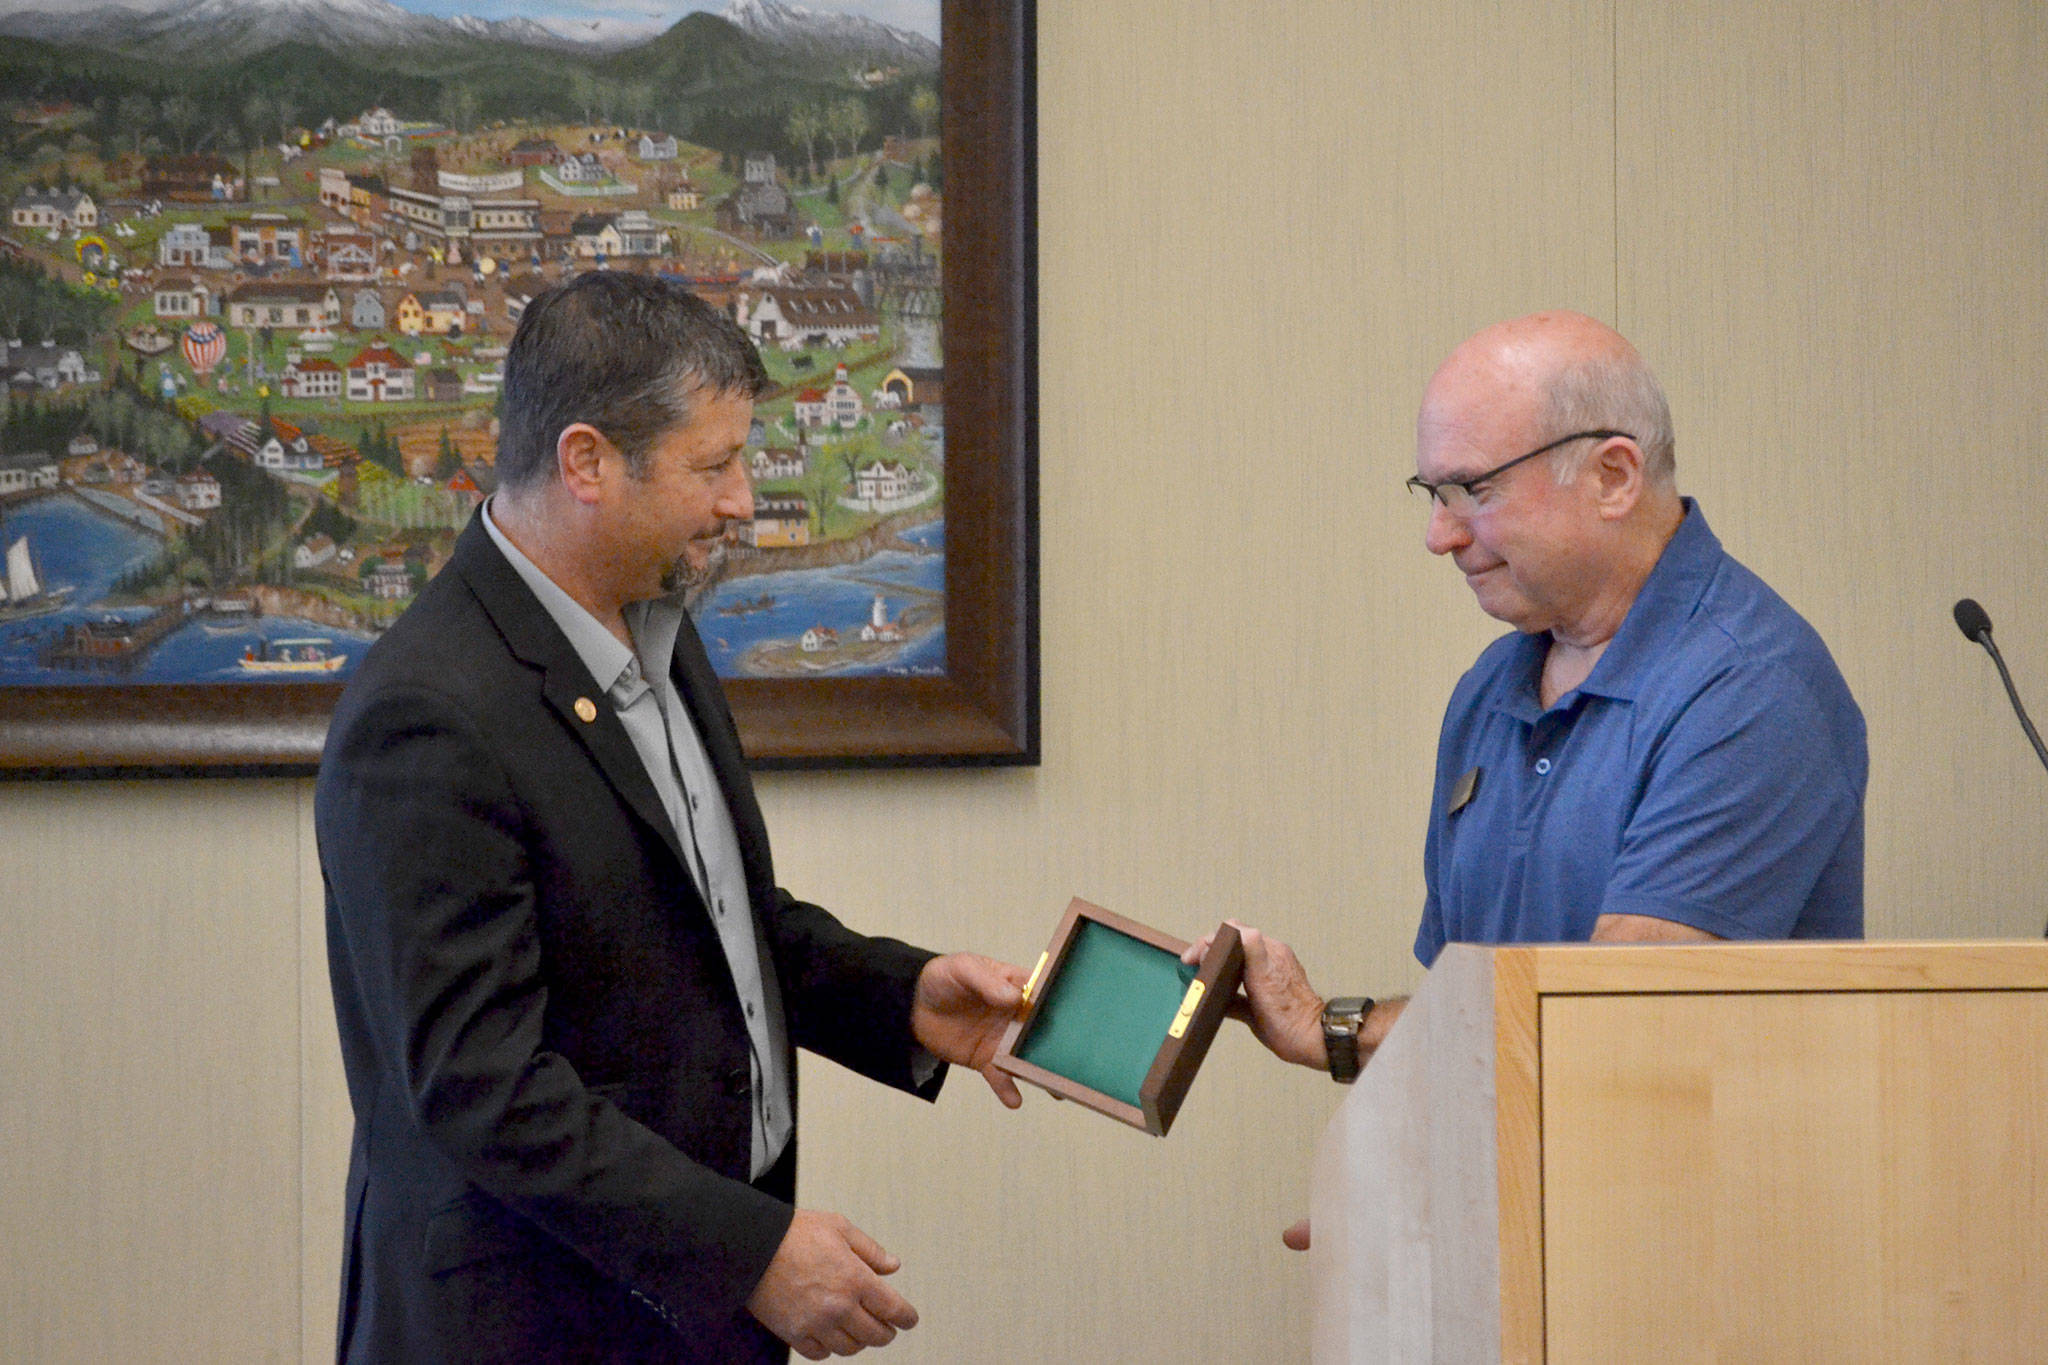 Jason Doig of Sequim accepts the Carnegie Medal from Sequim Mayor Dennis Smith on June 25 for his efforts to save a woman from jumping off a railing on the Hood Canal Bridge on March 3, 2017. “I think I did what a lot of people in this room would have done,” Doig said. Sequim Gazette photo by Matthew Nash